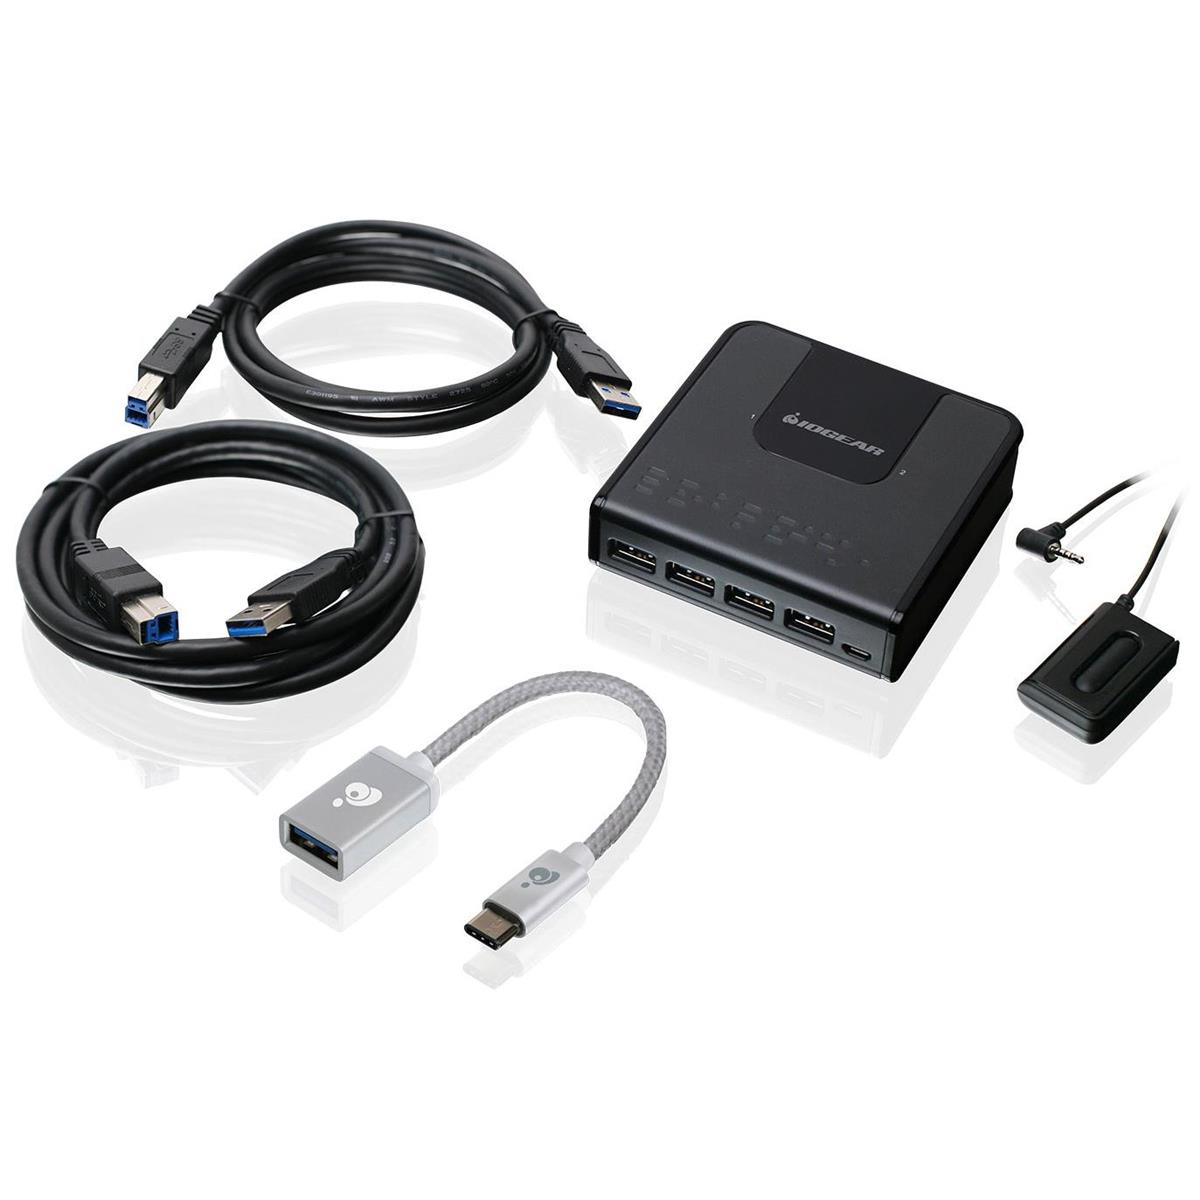 Image of IOGEAR 2x4 USB 3.0 Peripheral Sharing Switch with USB-A to USB-C Adapter Kit